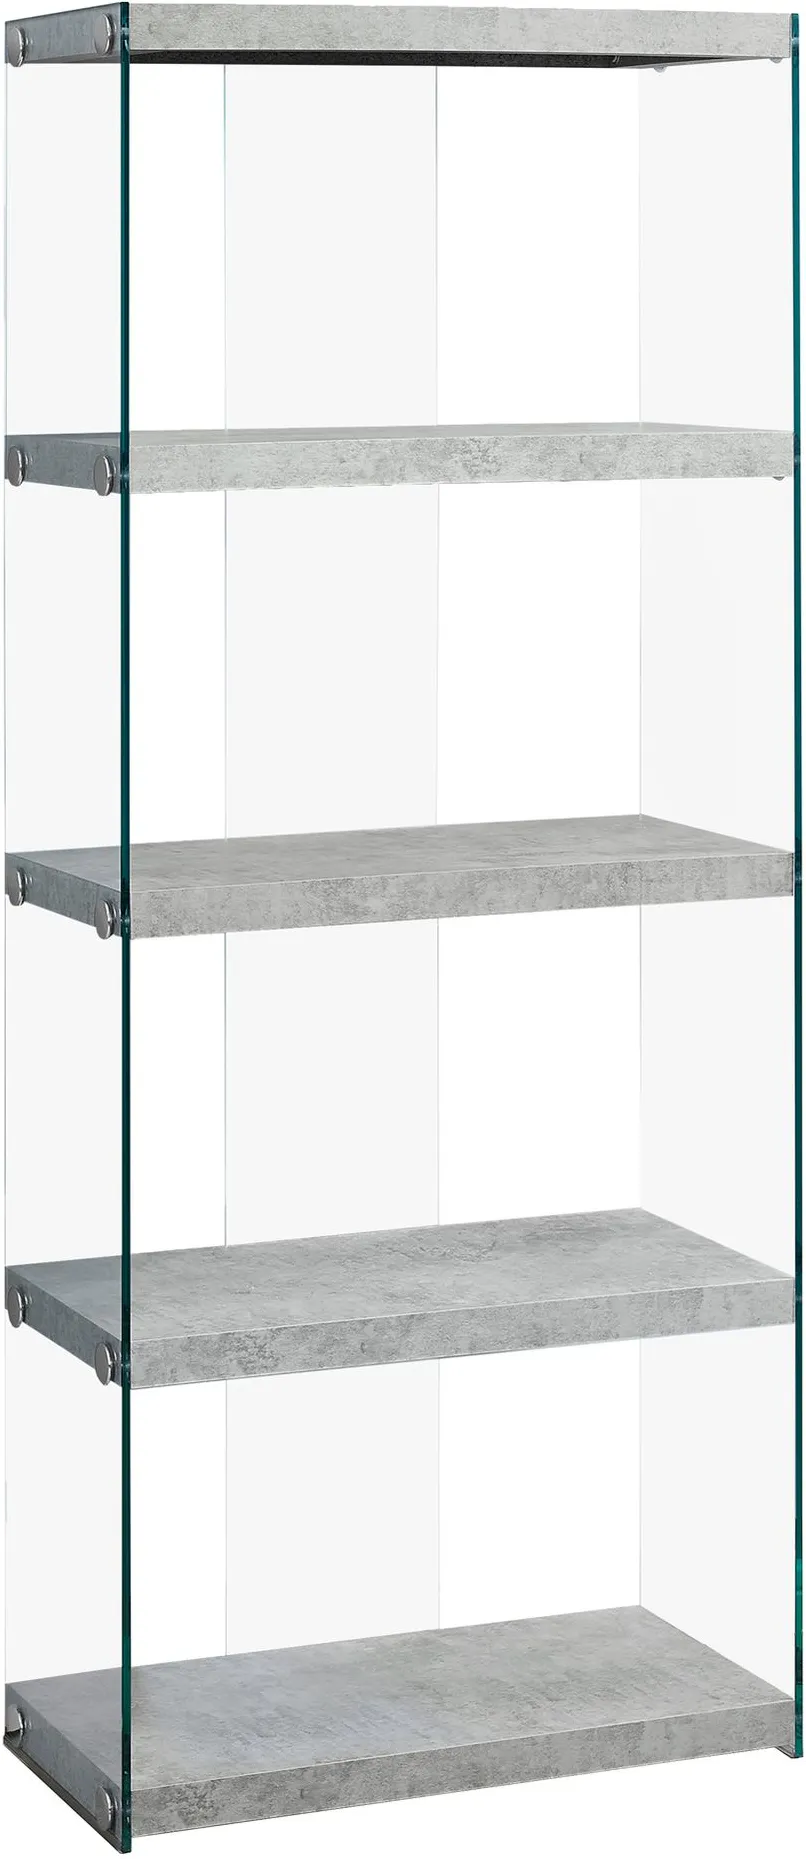 Bookshelf, Bookcase, Etagere, 5 Tier, 60"H, Office, Bedroom, Tempered Glass, Laminate, Grey, Clear, Contemporary, Modern